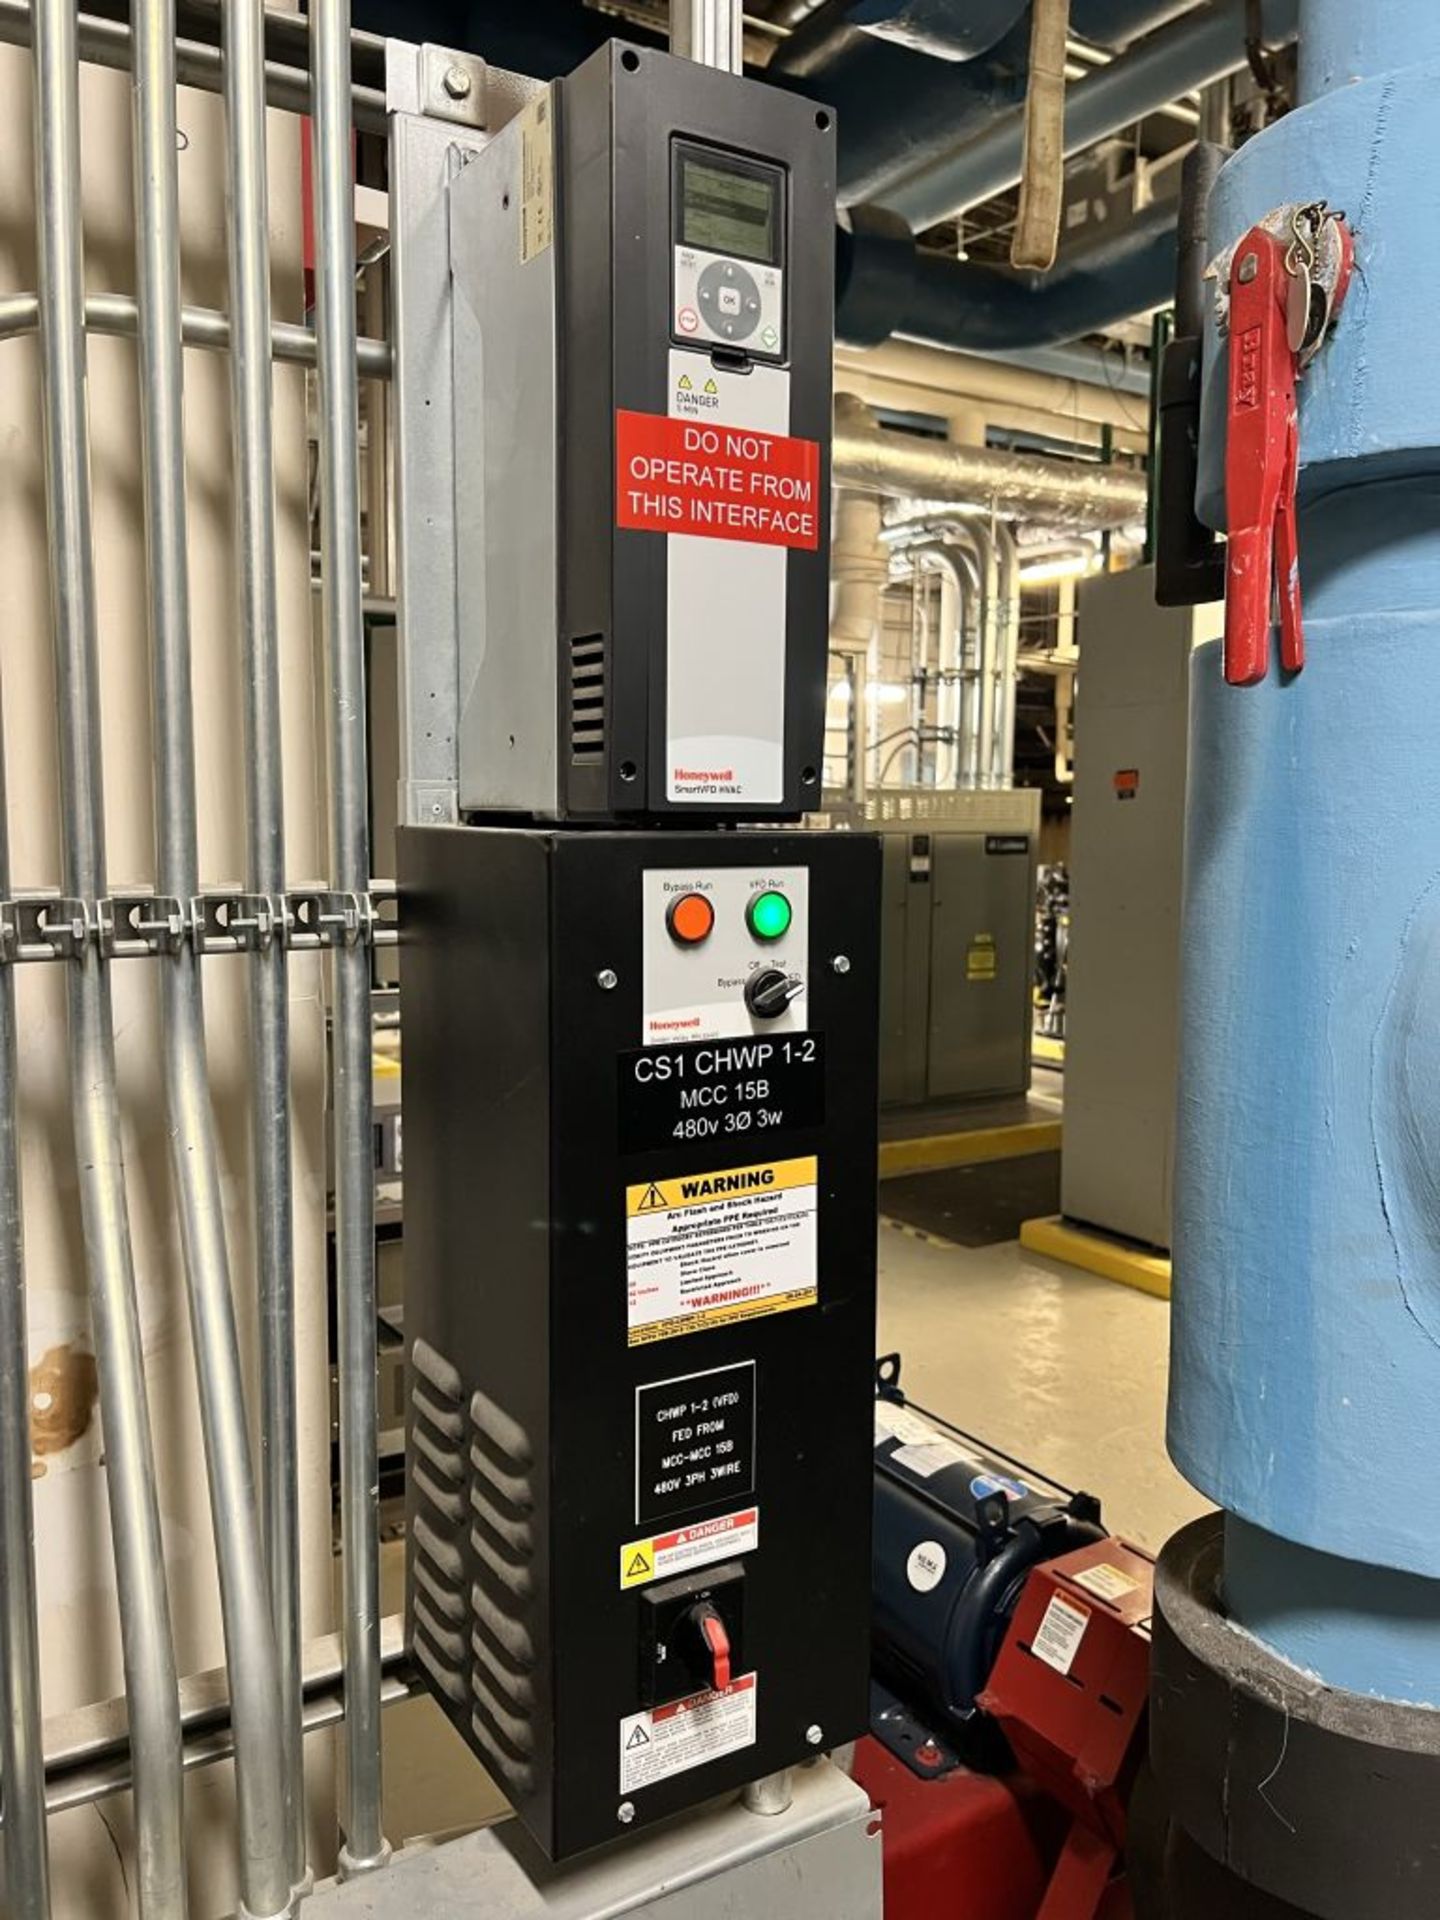 Spartanburg, SC - Honeywell Smart Variable Frequency Drive - Image 2 of 3